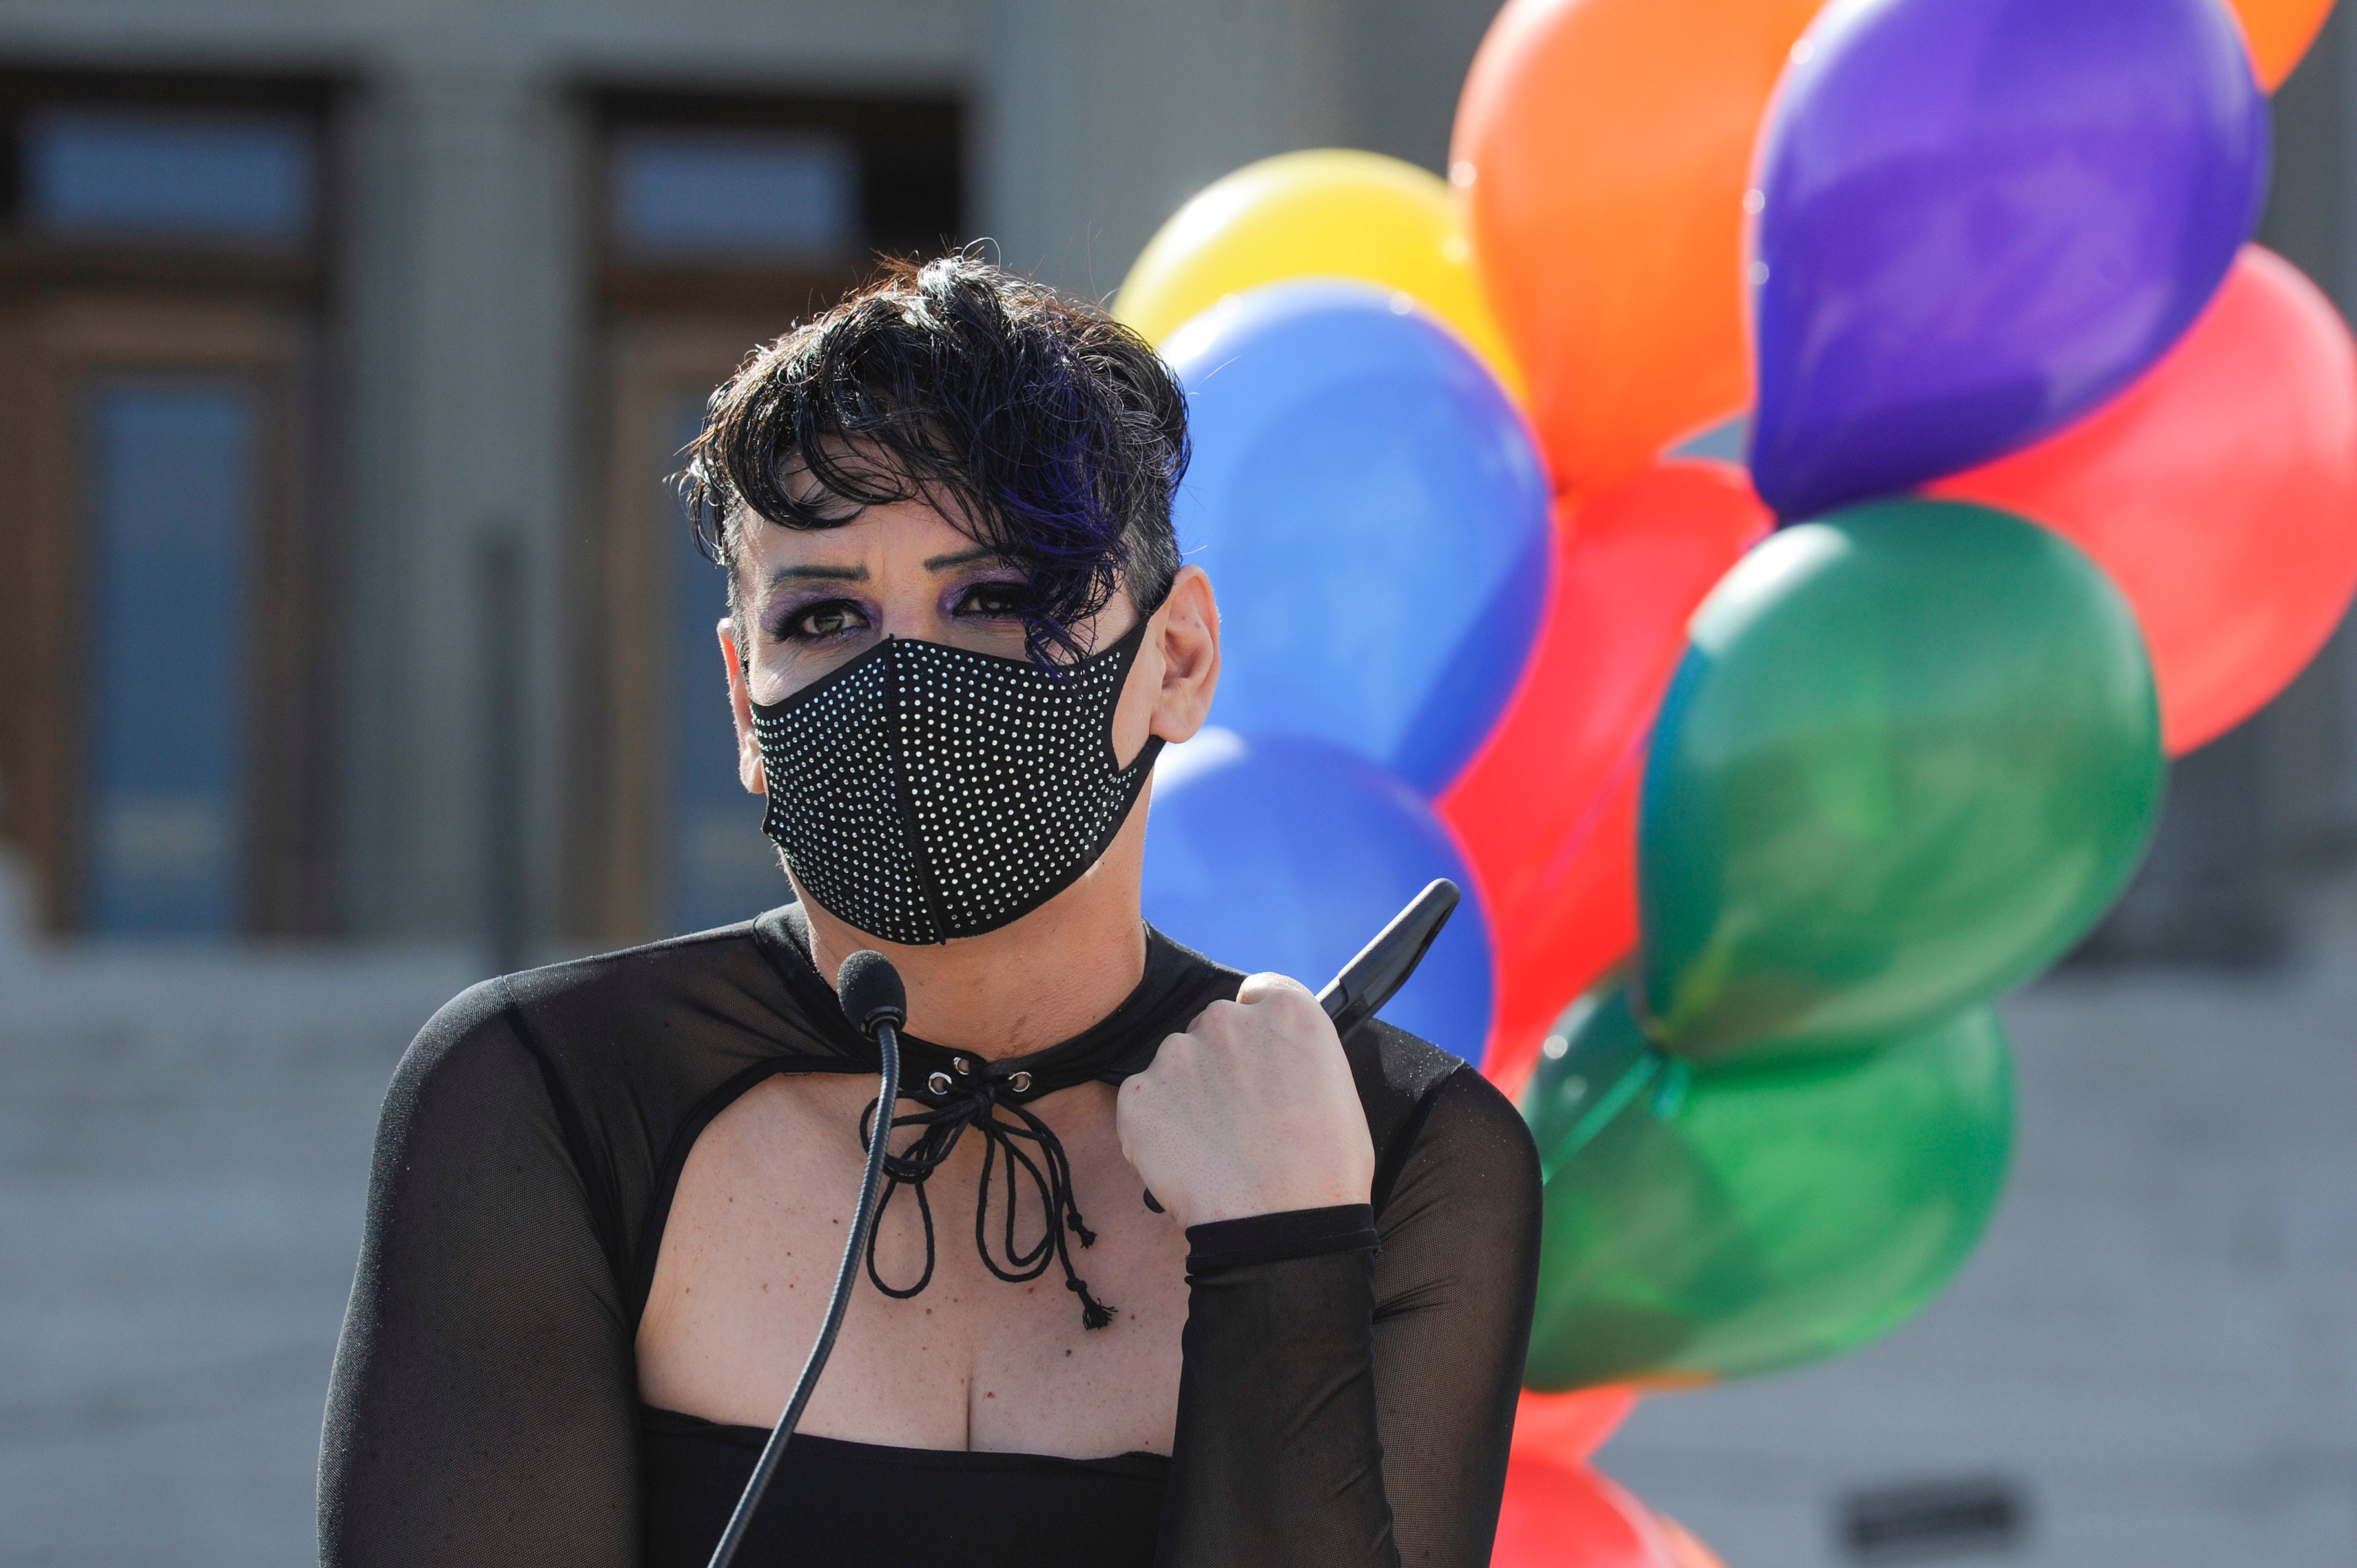 Adria Jawort, pictured in 2021, is among plaintiffs challenging Montana’s broadly written law targeting drag performers in the state.